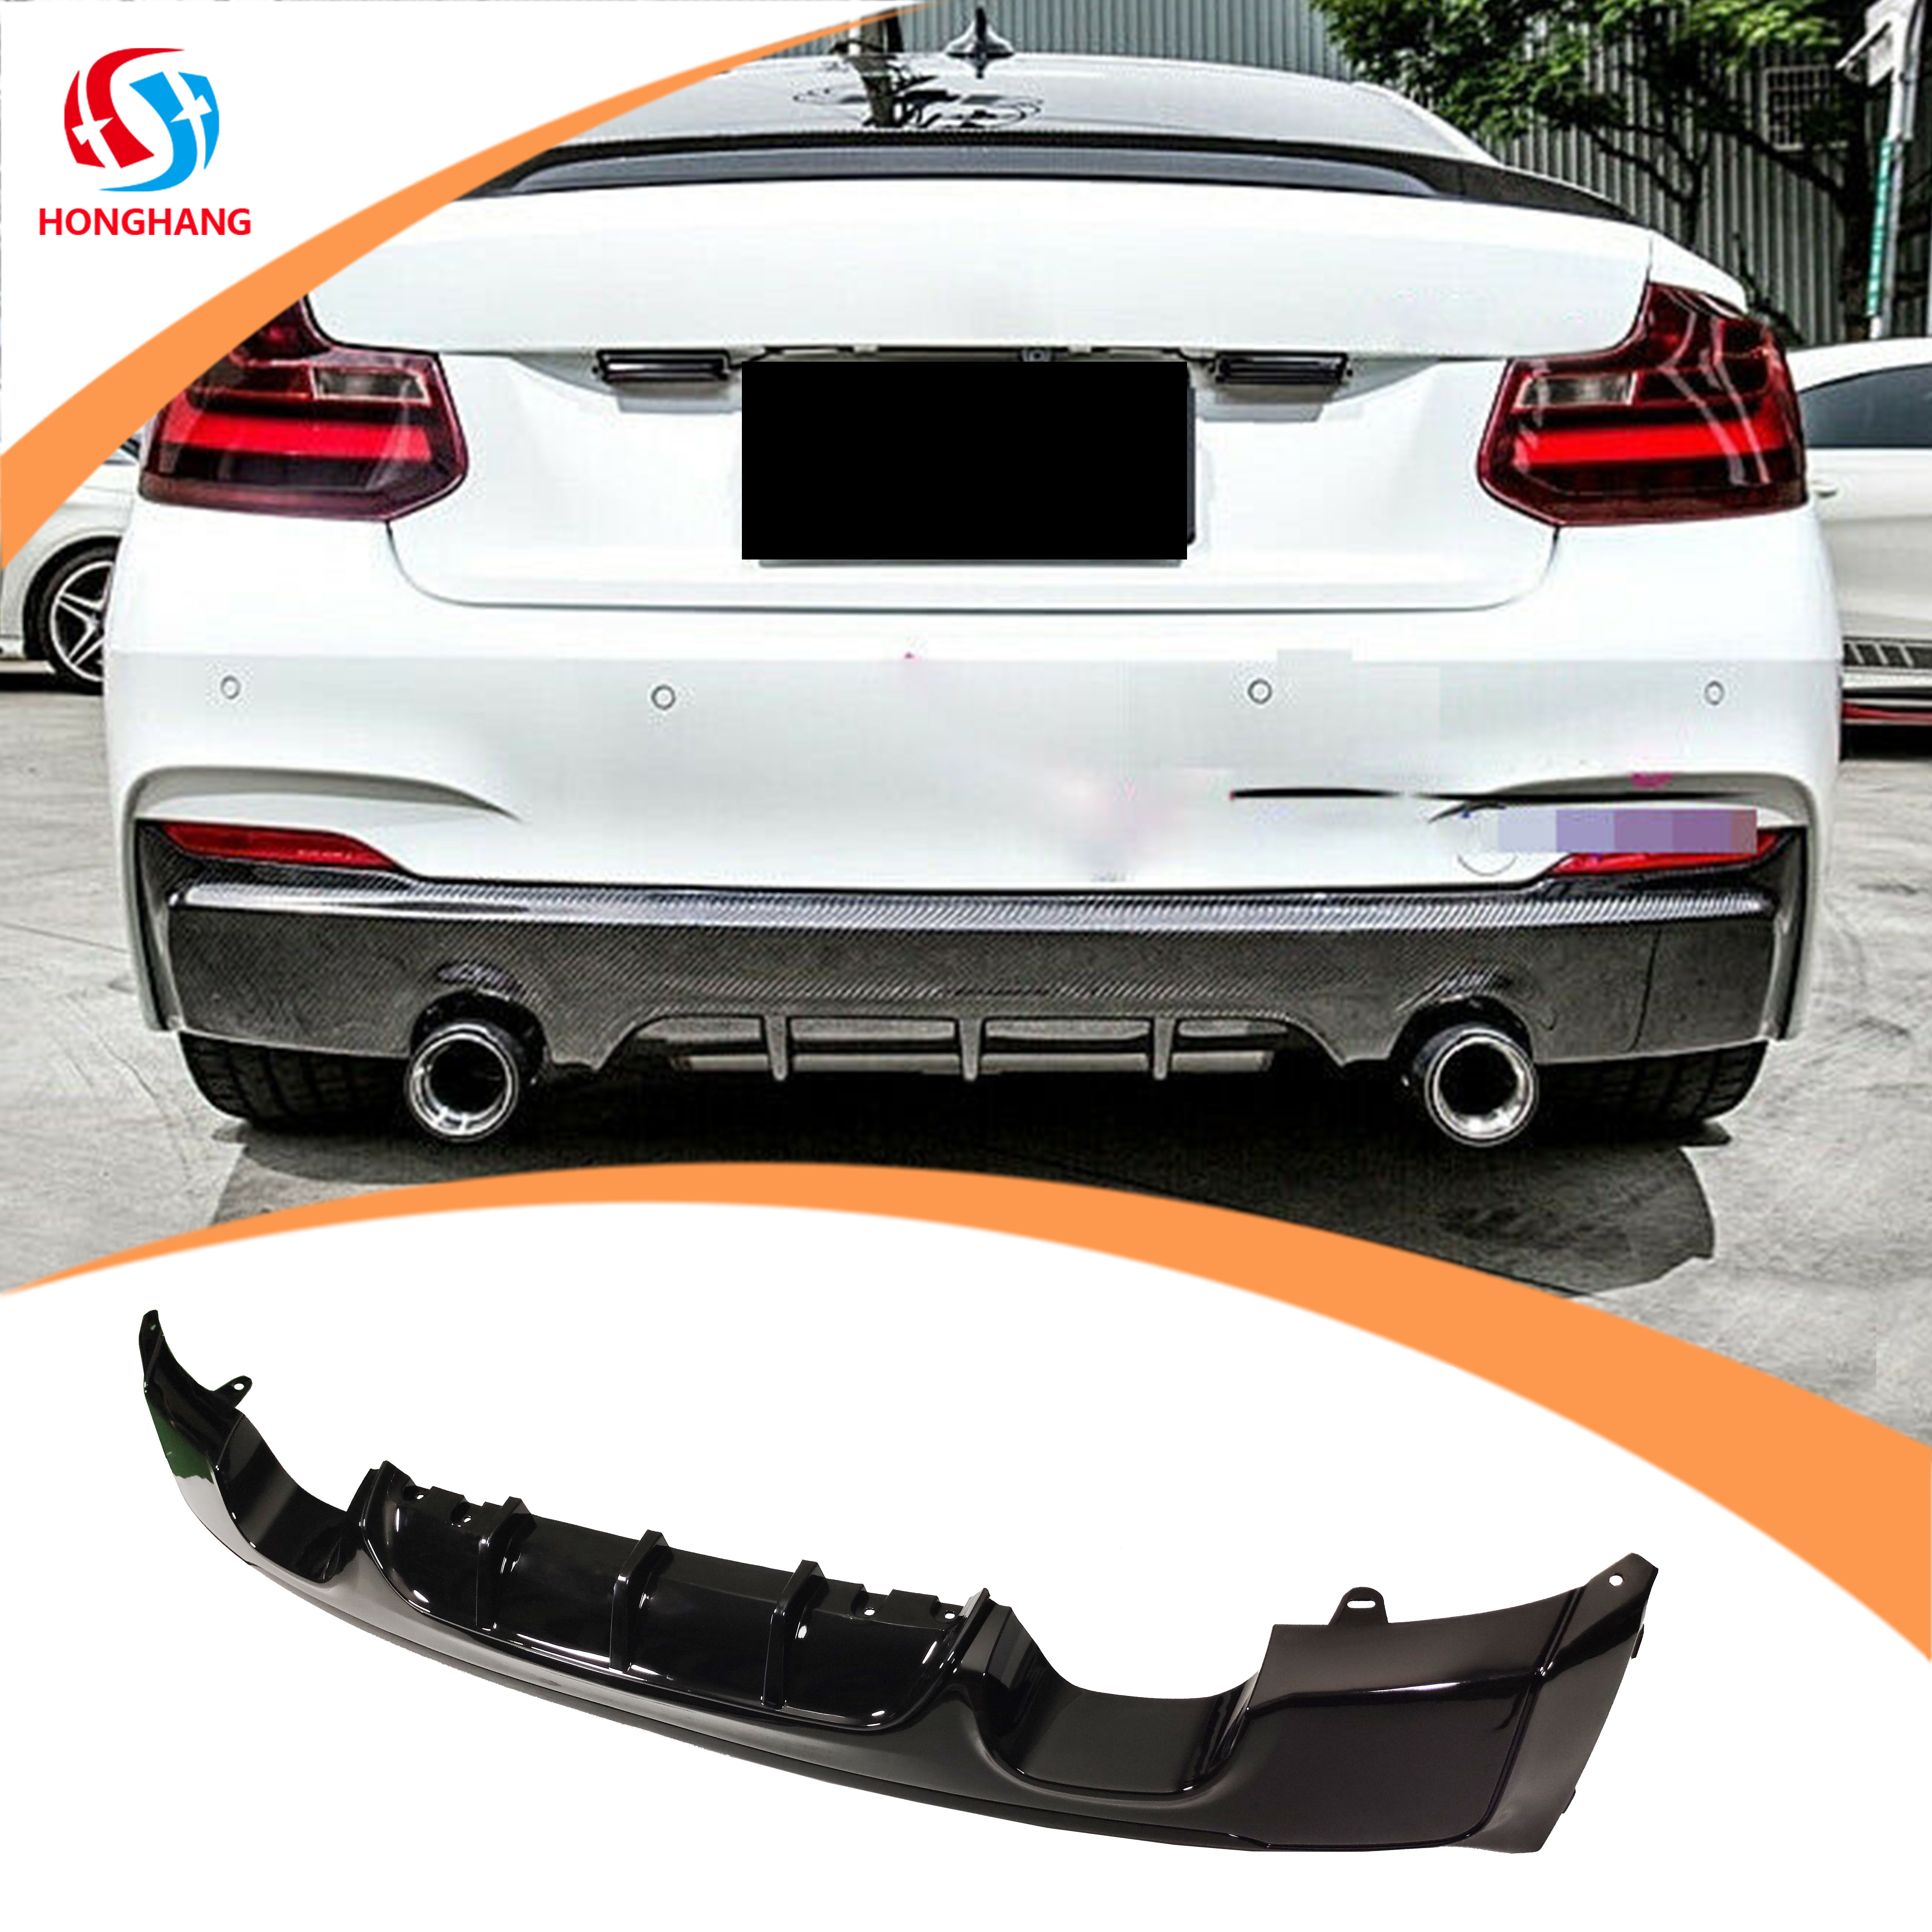 MP Style Rear Bumpe Rdiffuser for Bmw 2 Series F22 